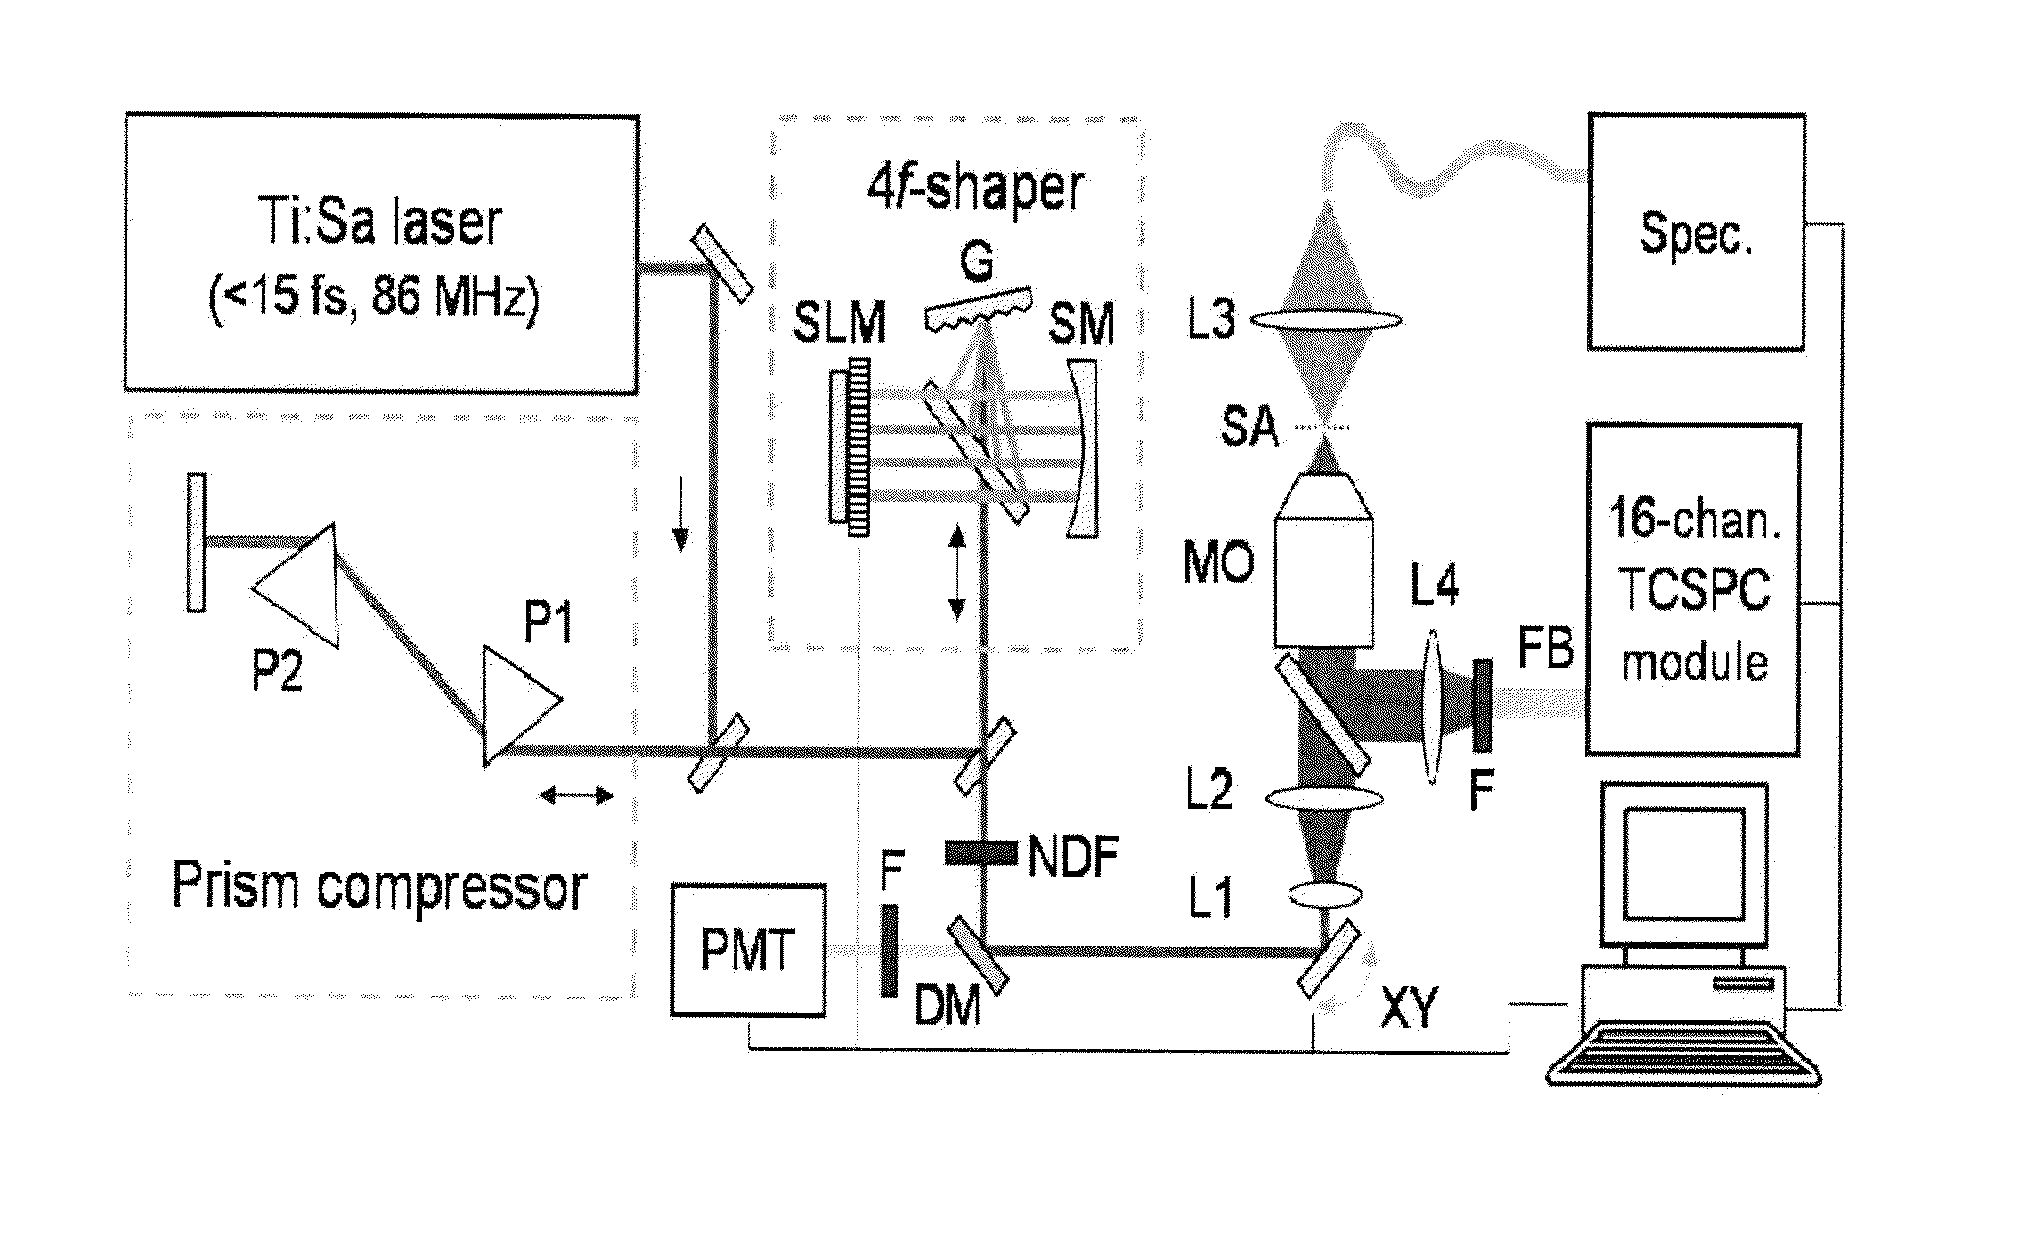 Laser pulse synthesis system